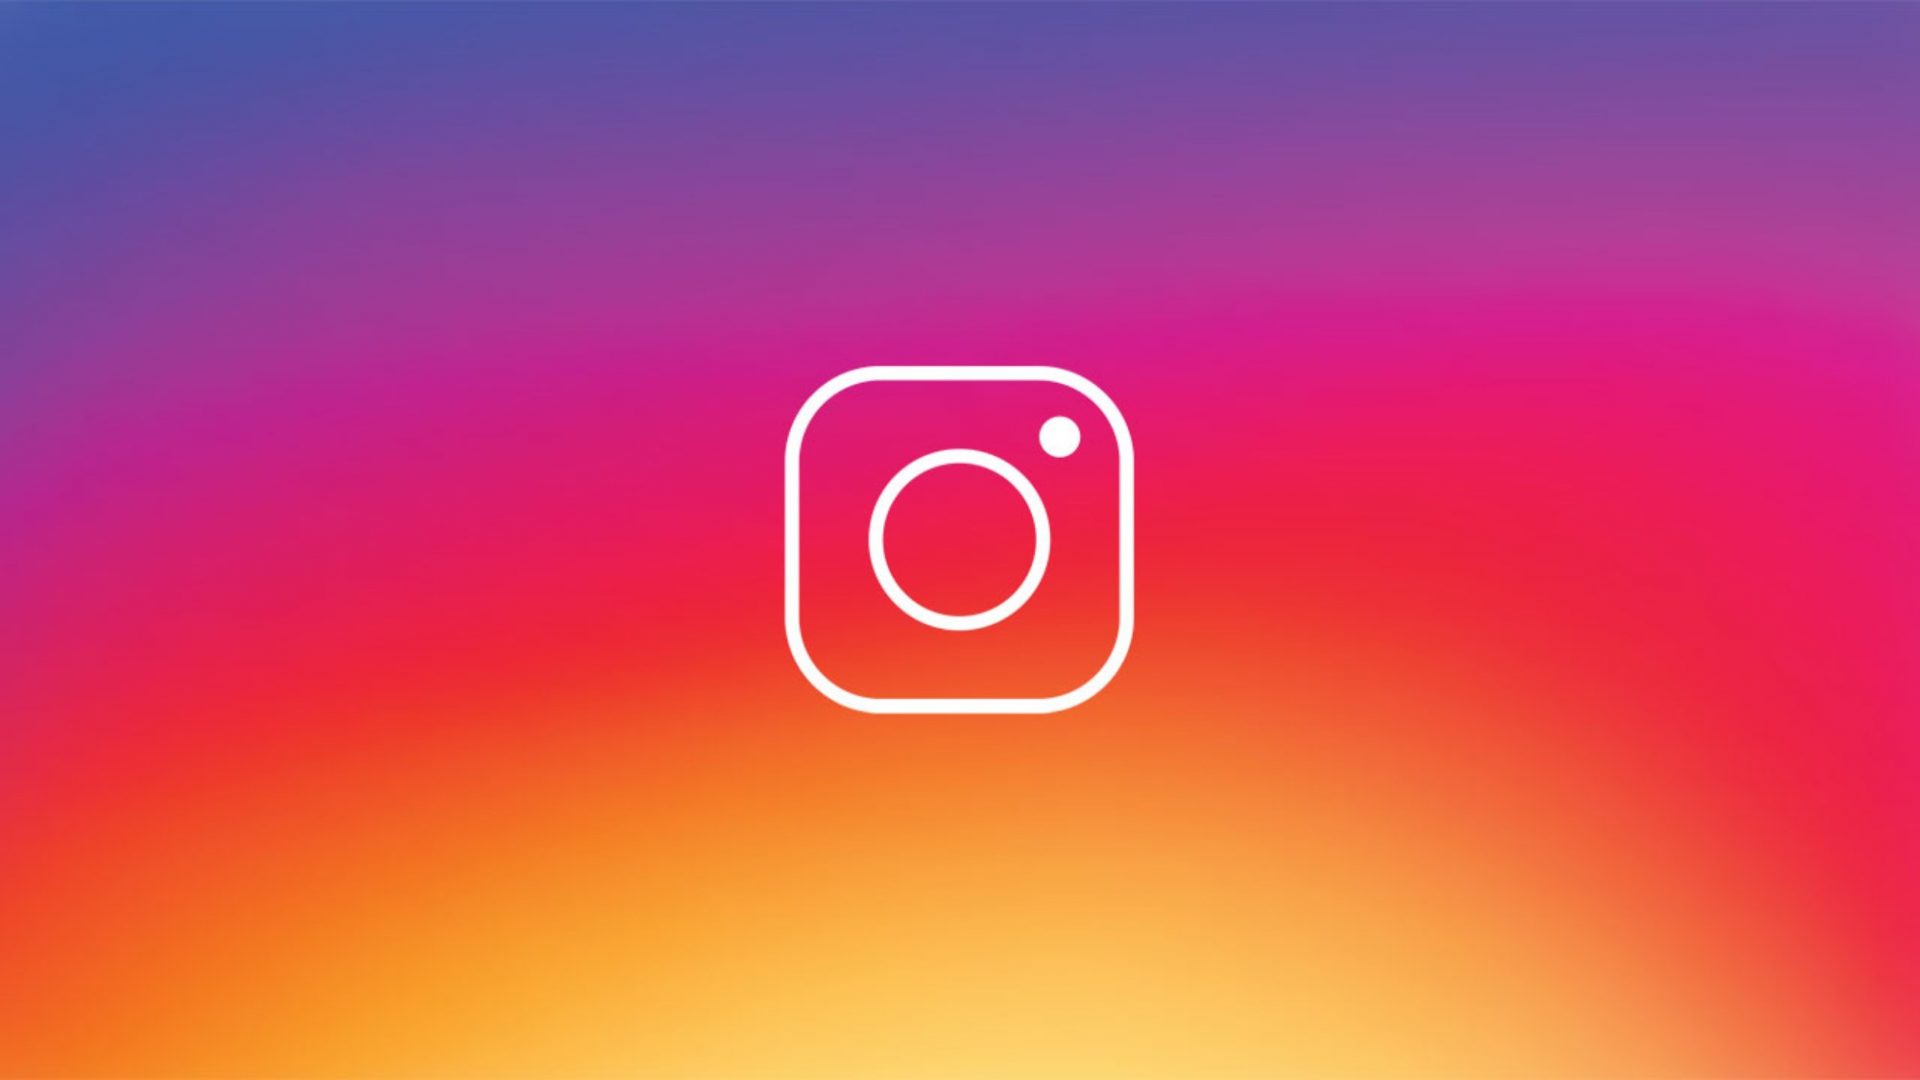 Your Instagram Account: A Step-by-Step Guide